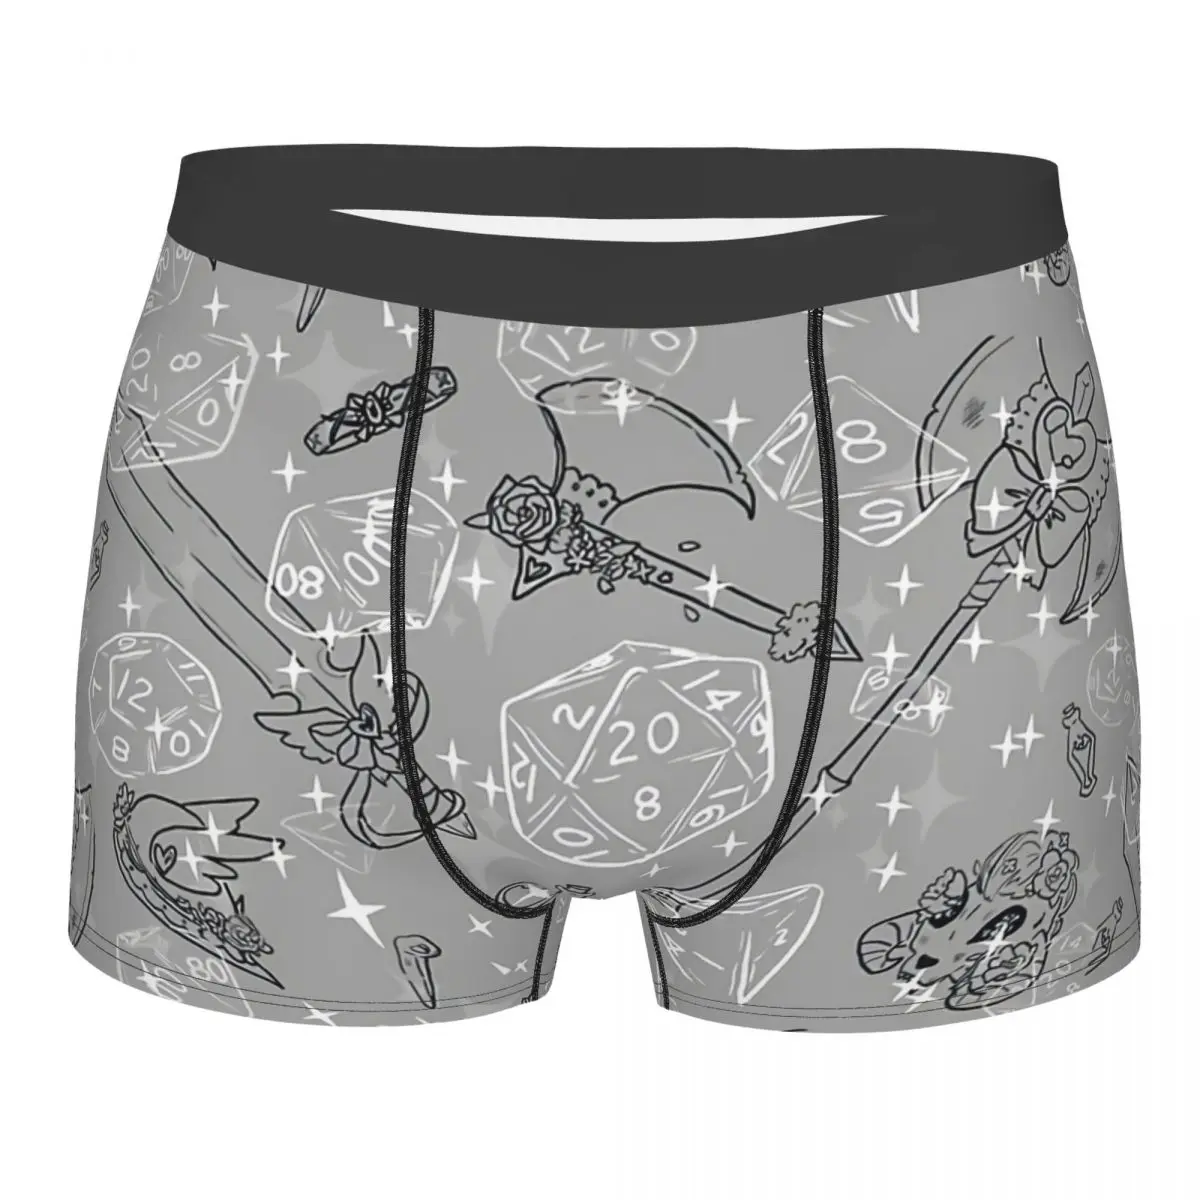 

Gear Dice D20 Man's Boxer Briefs Underpants DnD Game Highly Breathable High Quality Sexy Shorts Gift Idea